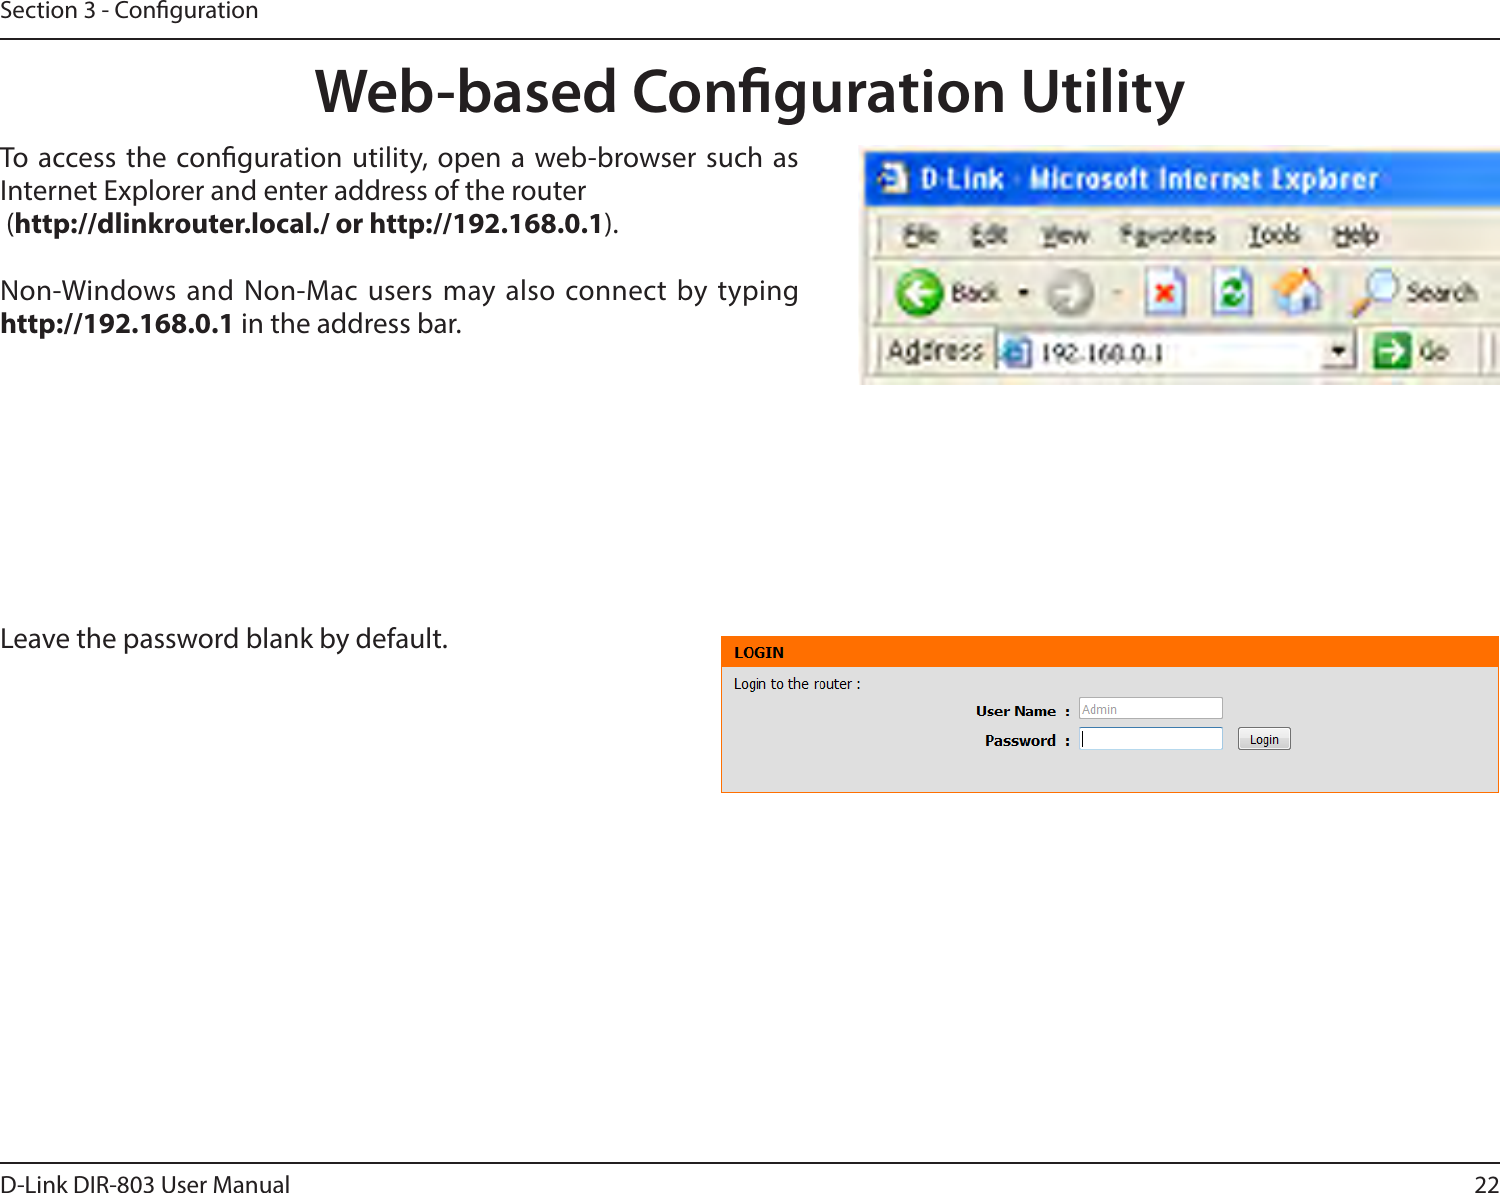 22D-Link DIR-803 User ManualSection 3 - CongurationWeb-based Conguration UtilityLeave the password blank by default.To access the conguration utility, open a web-browser such as Internet Explorer and enter address of the router (http://dlinkrouter.local./ or http://192.168.0.1).Non-Windows and Non-Mac users may also connect by typing http://192.168.0.1 in the address bar.